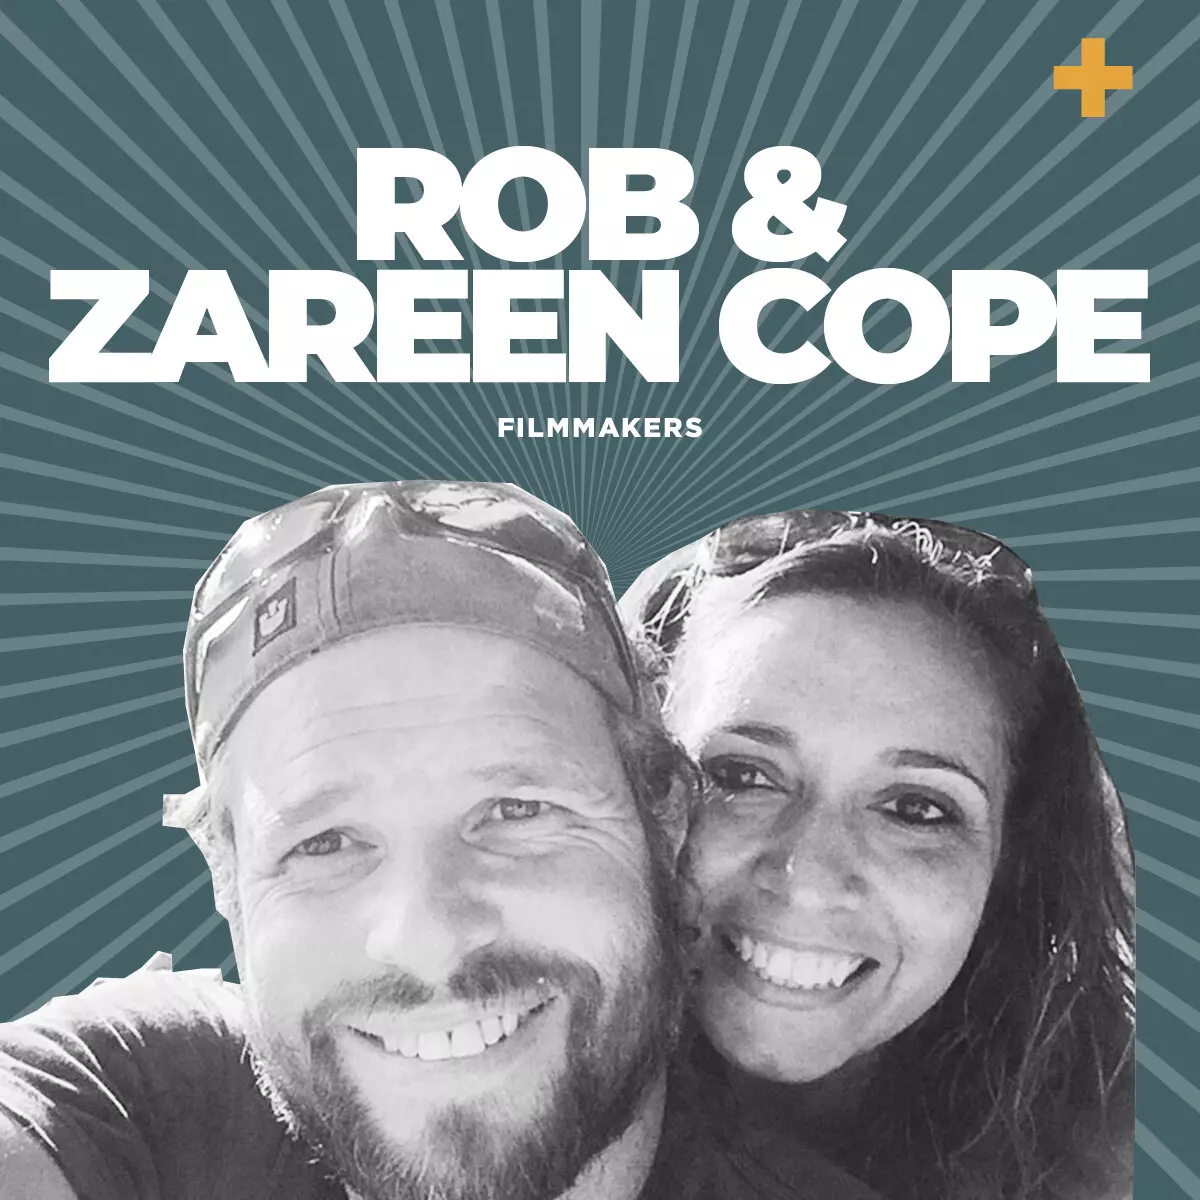 Round Teen Boobs Selfie - Screen Sanity Episode 7: Rob and Zareen Cope | Screen Sanity